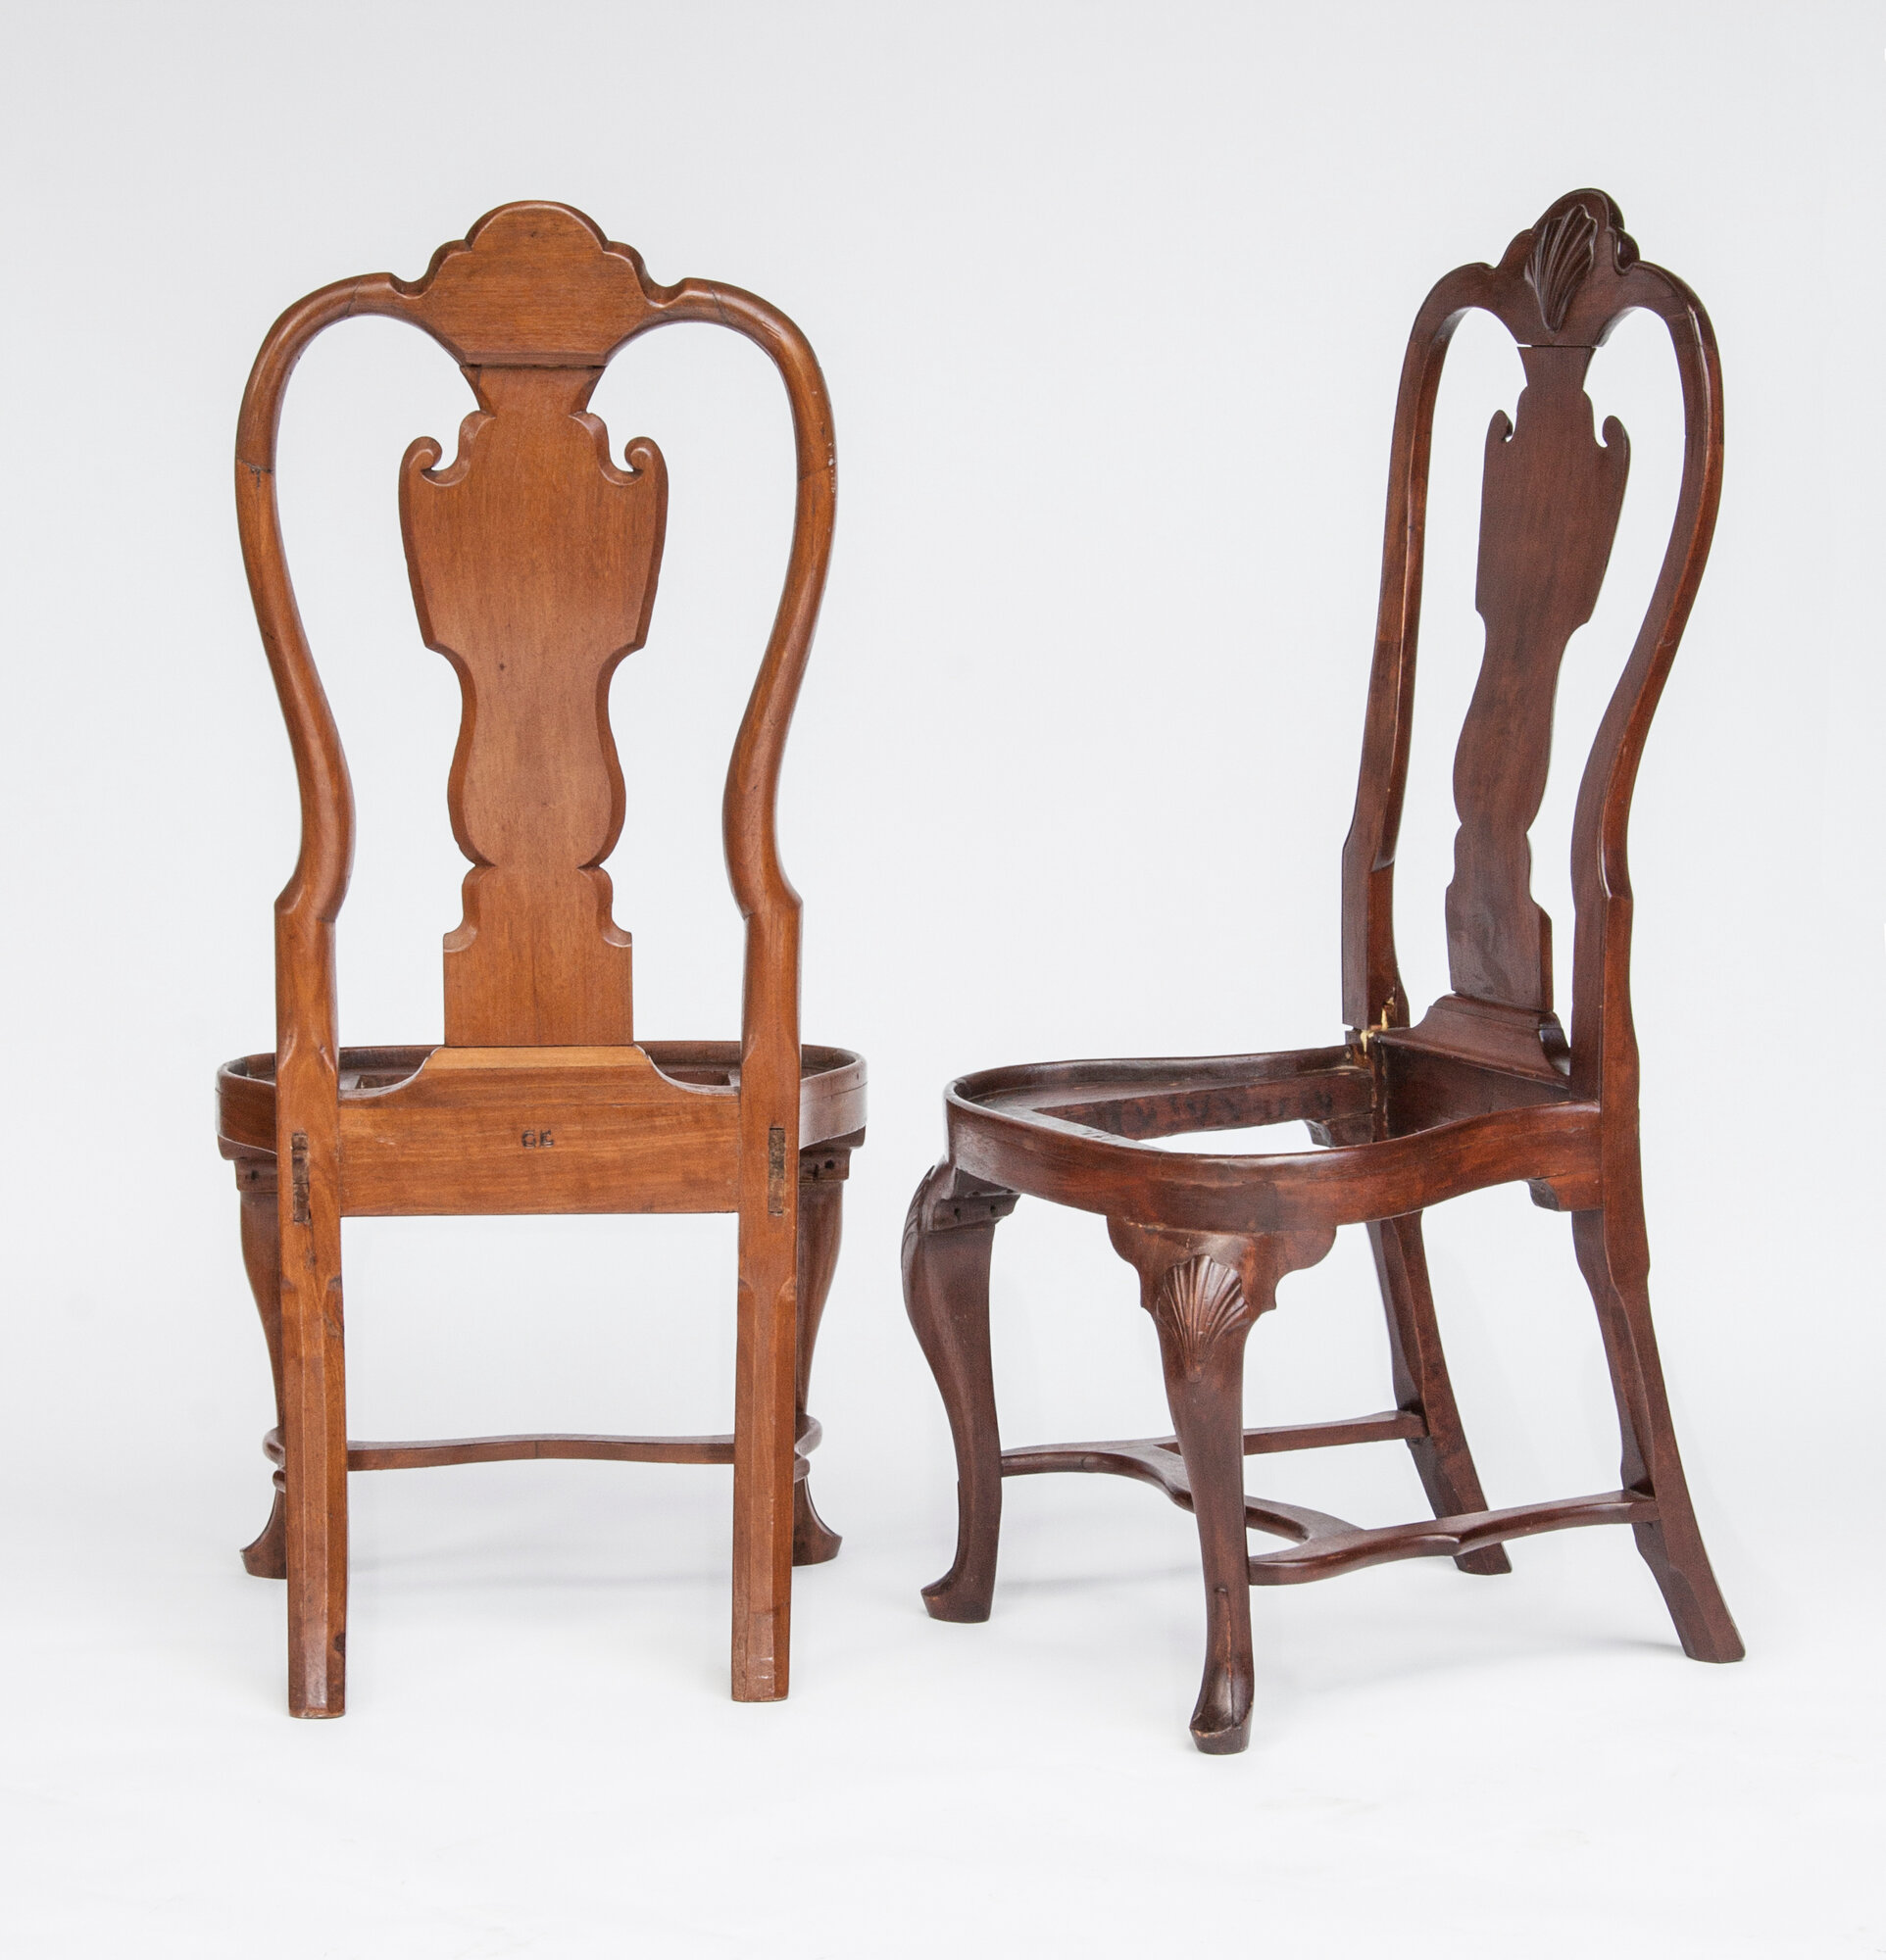 Emlen Family Queen Anne Chairs, Stenton Collection